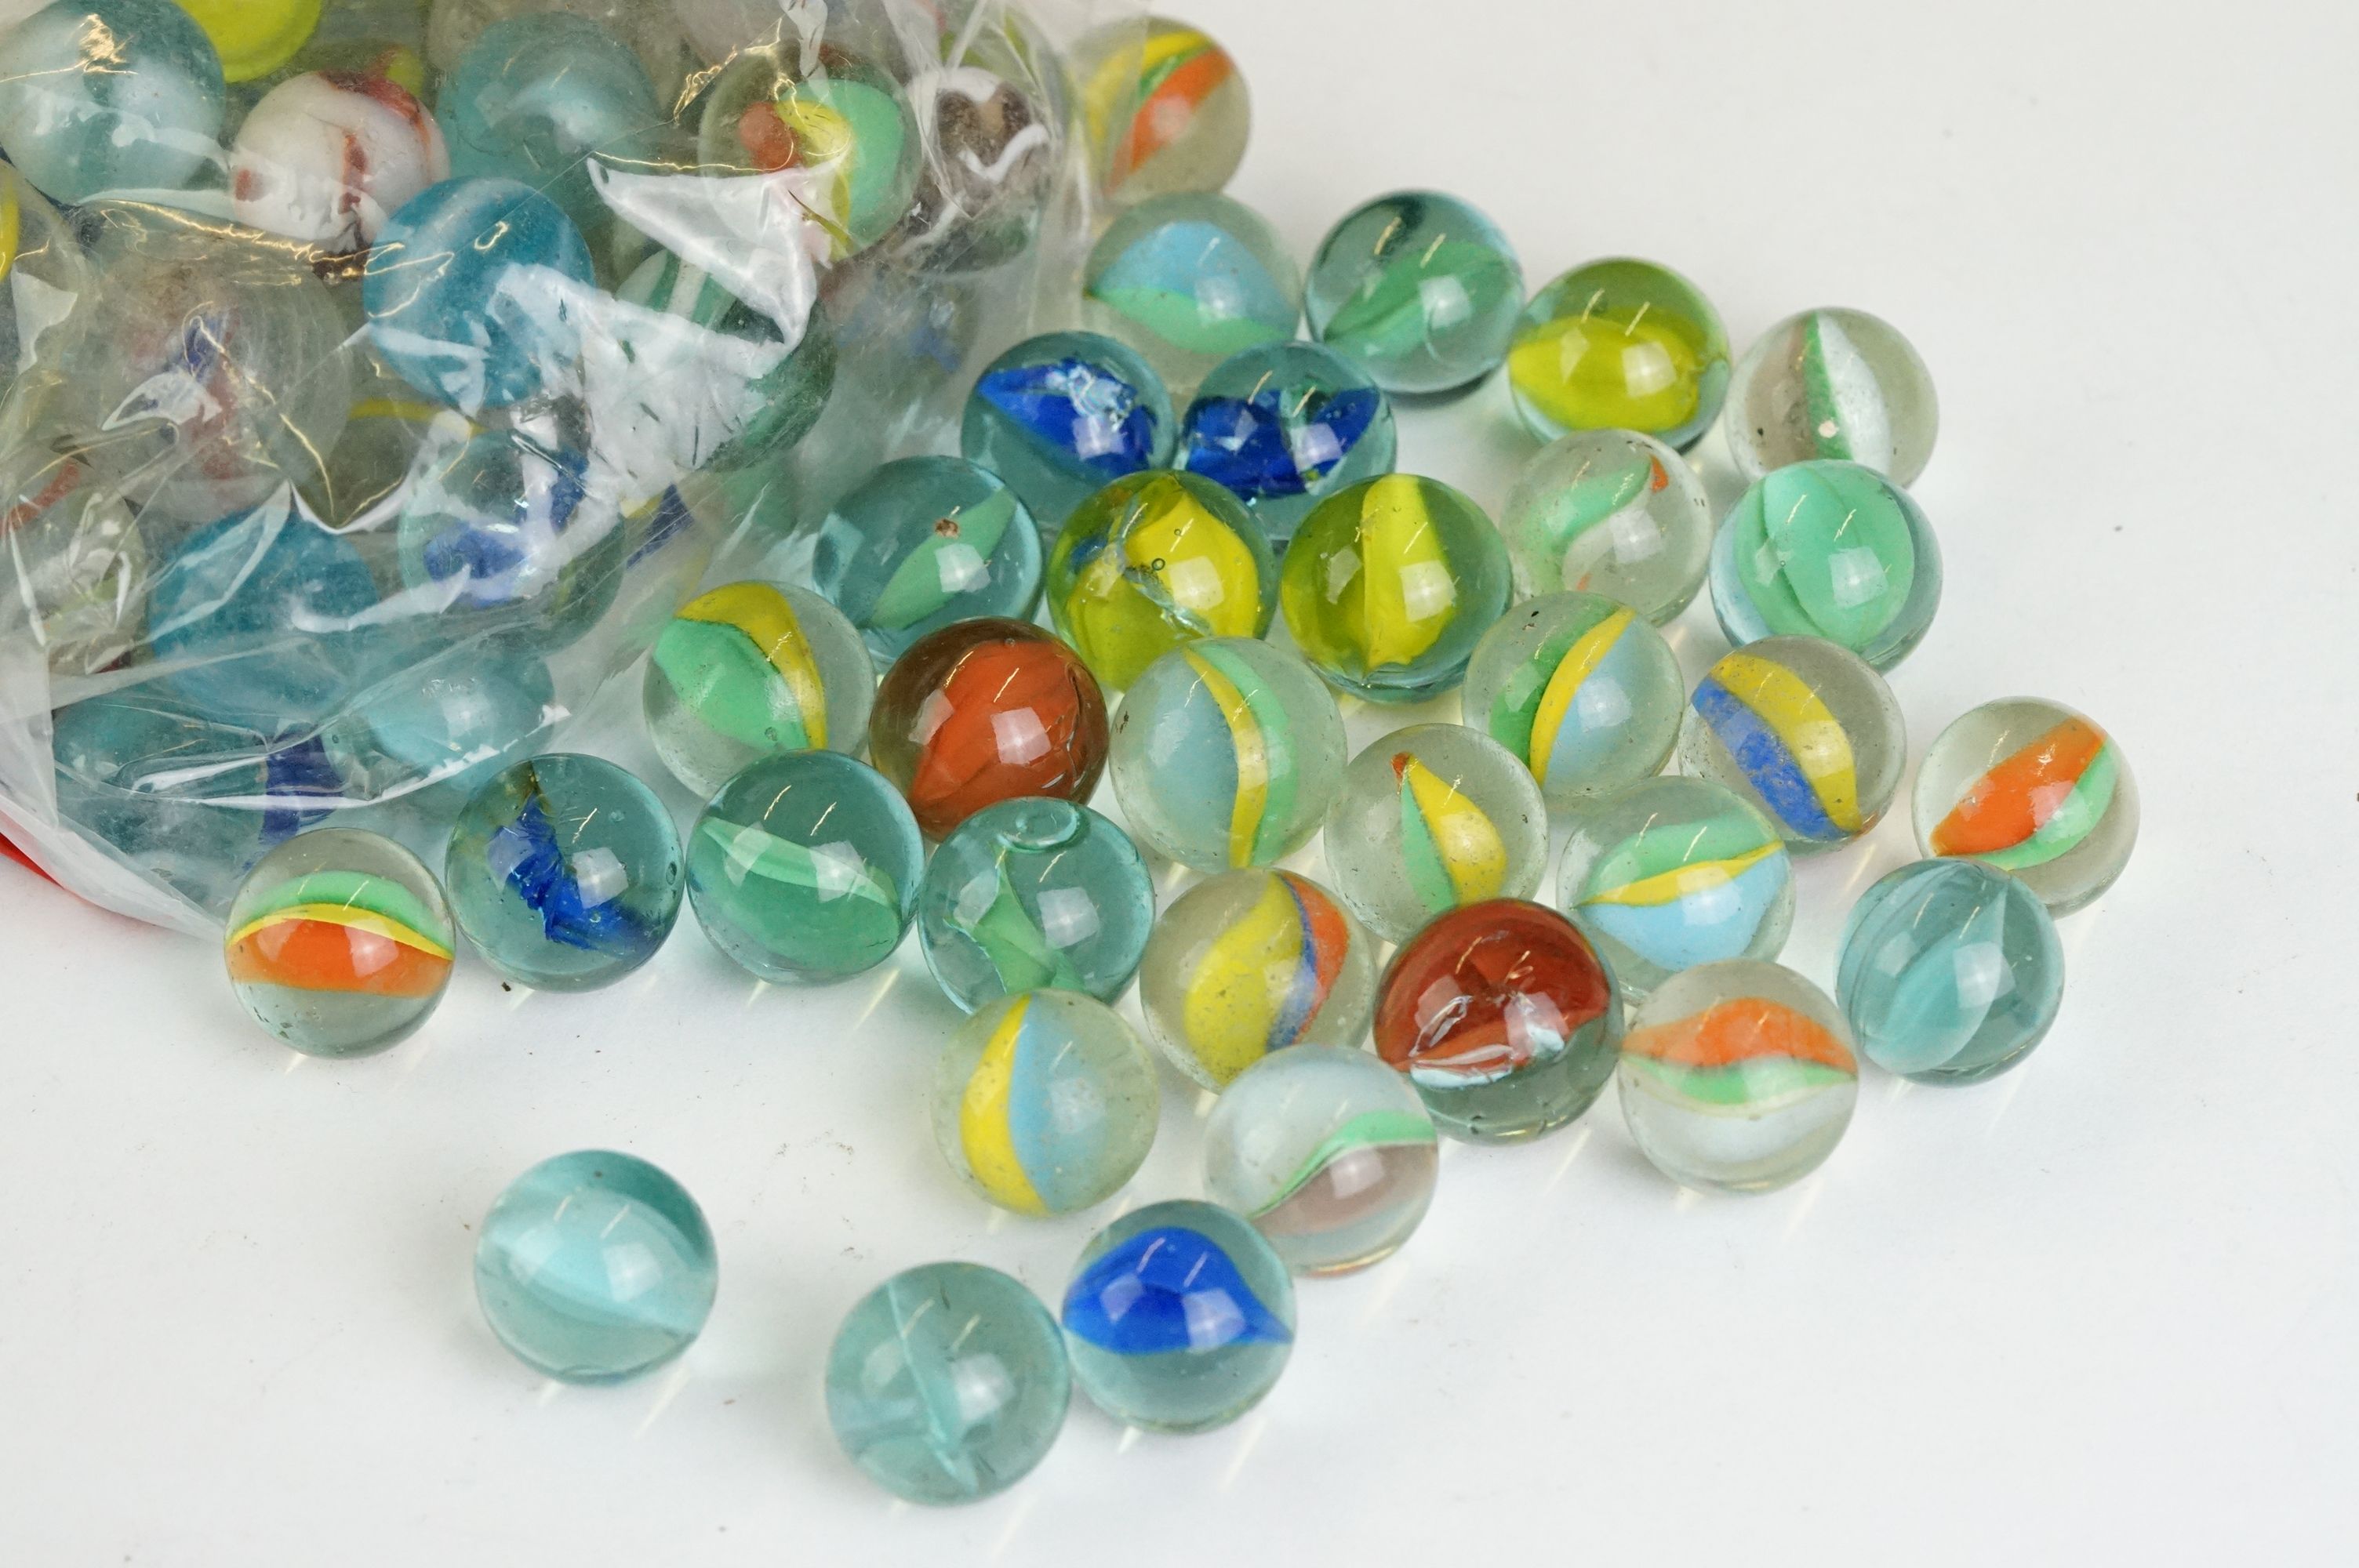 A small collection of vintage glass marbles contained within two bags. - Image 8 of 13